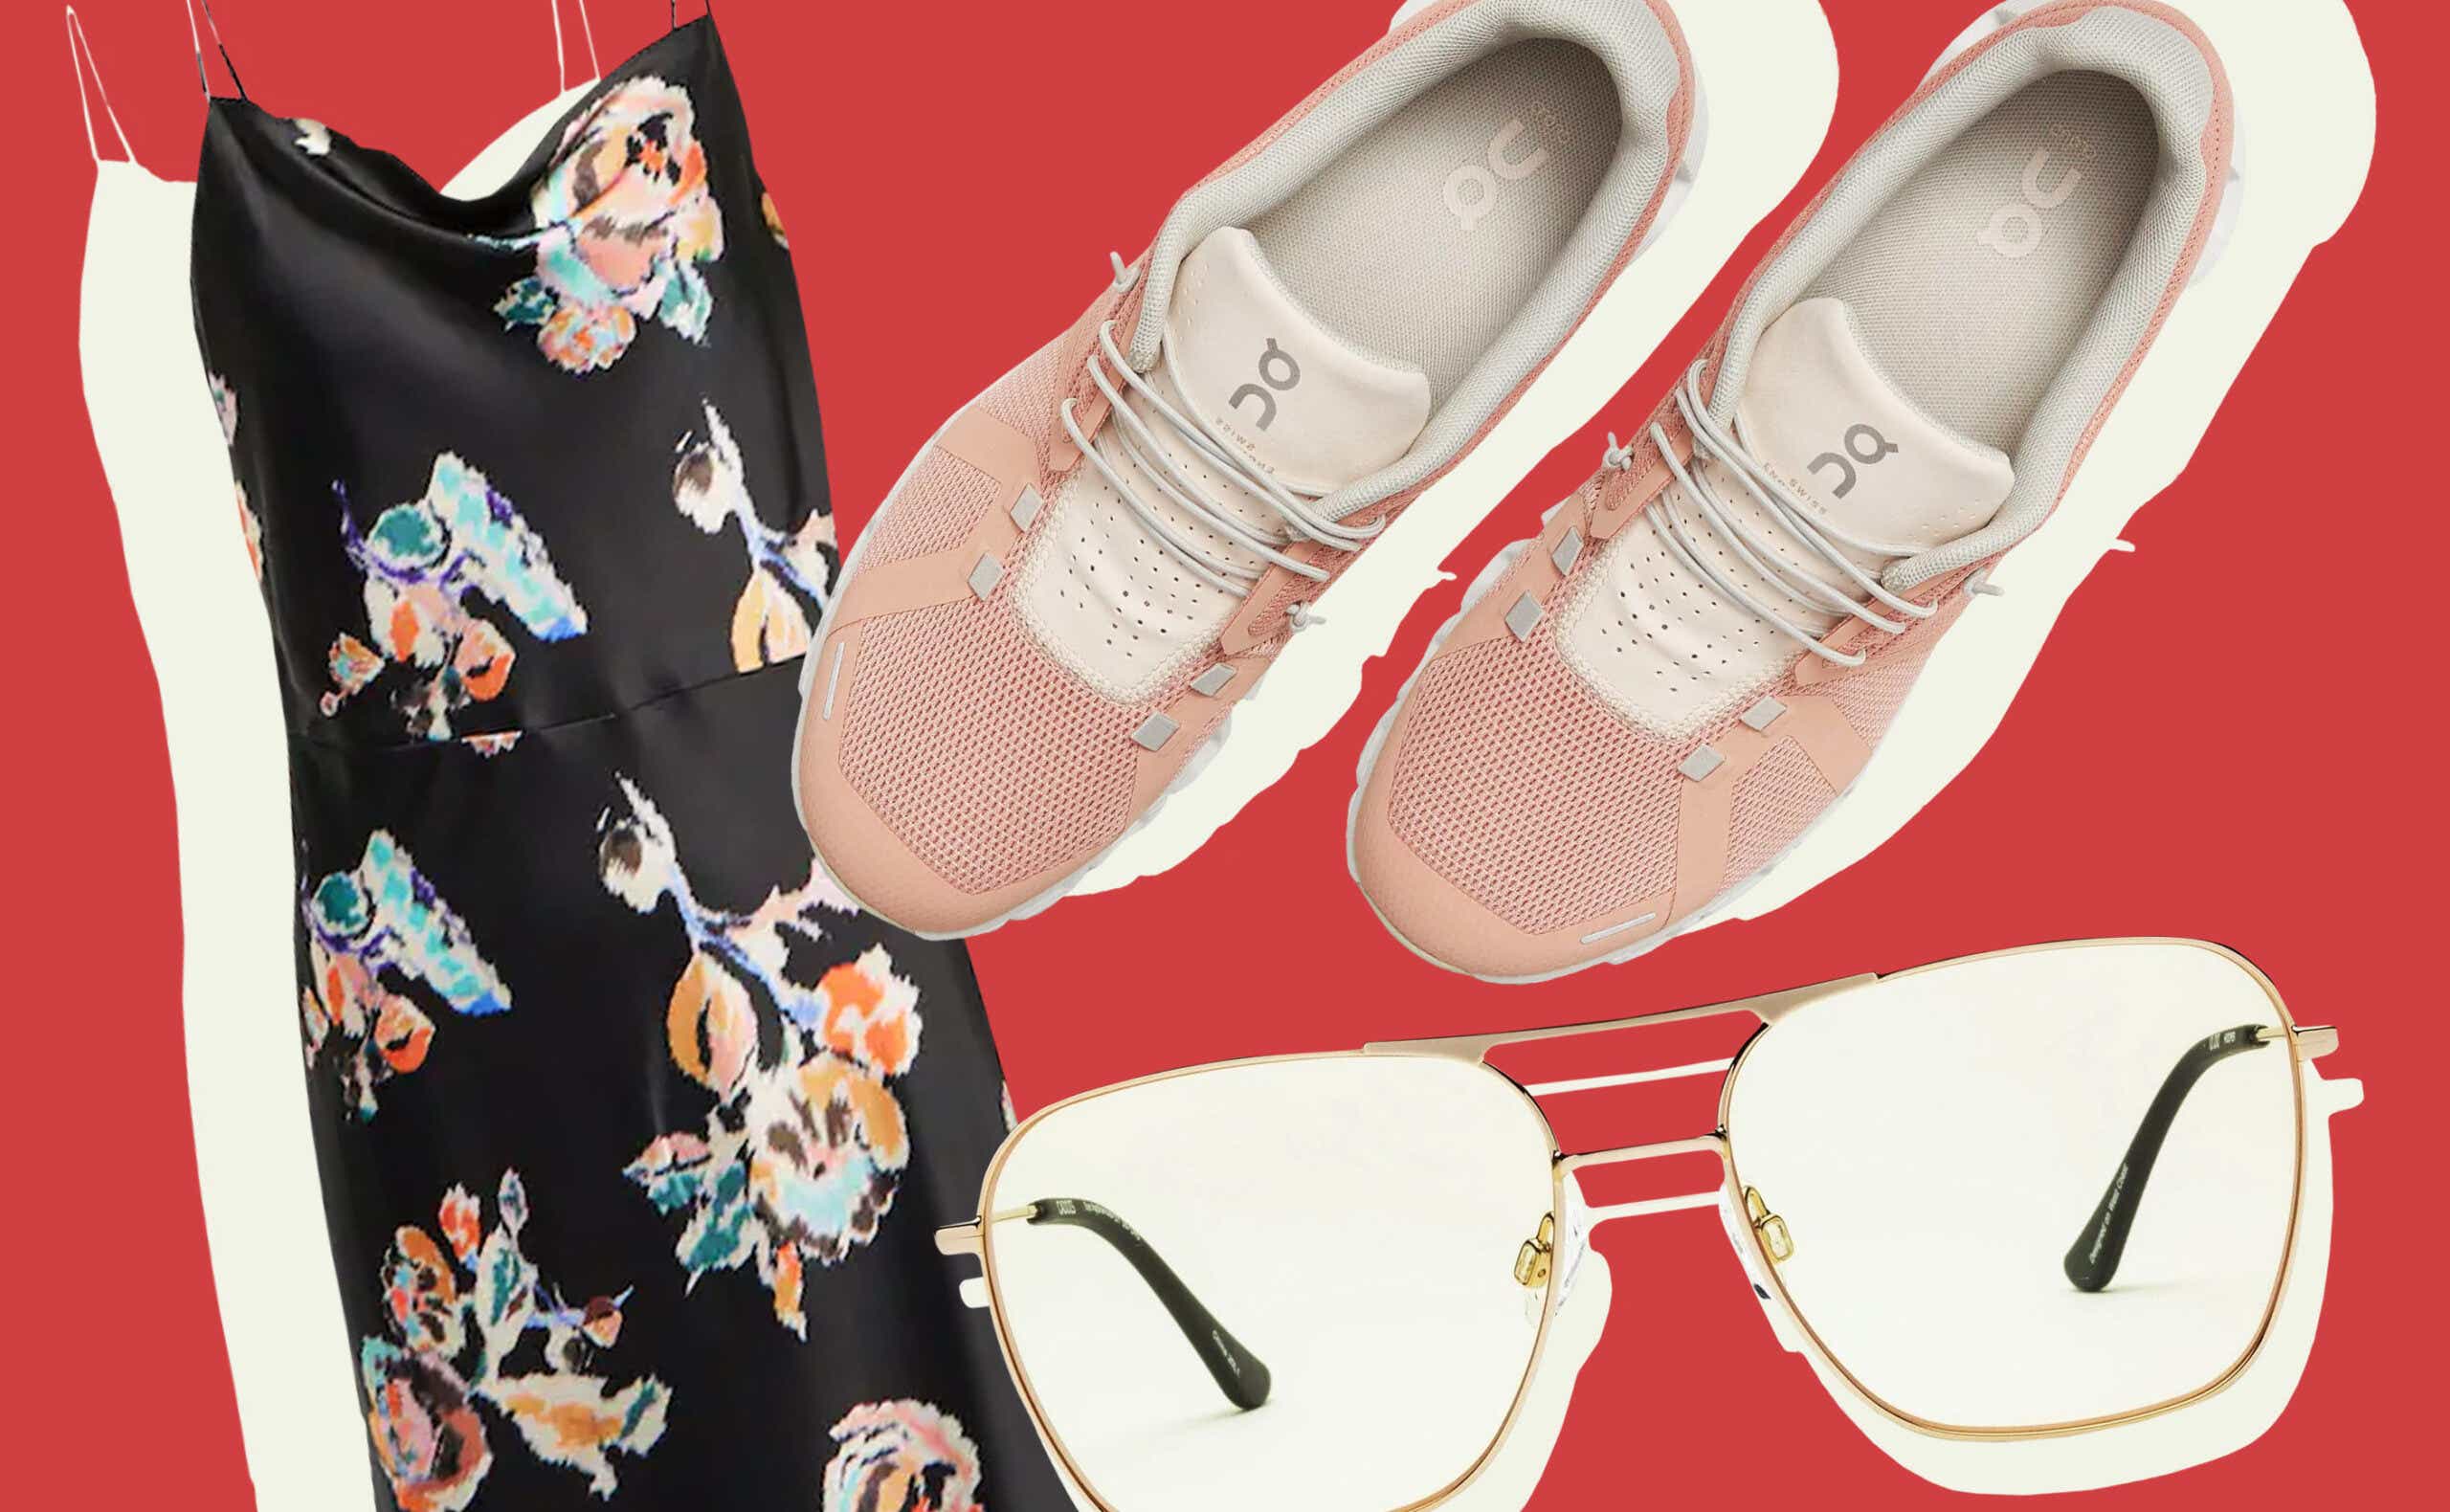 floral dress, glasses, sneakers on red background